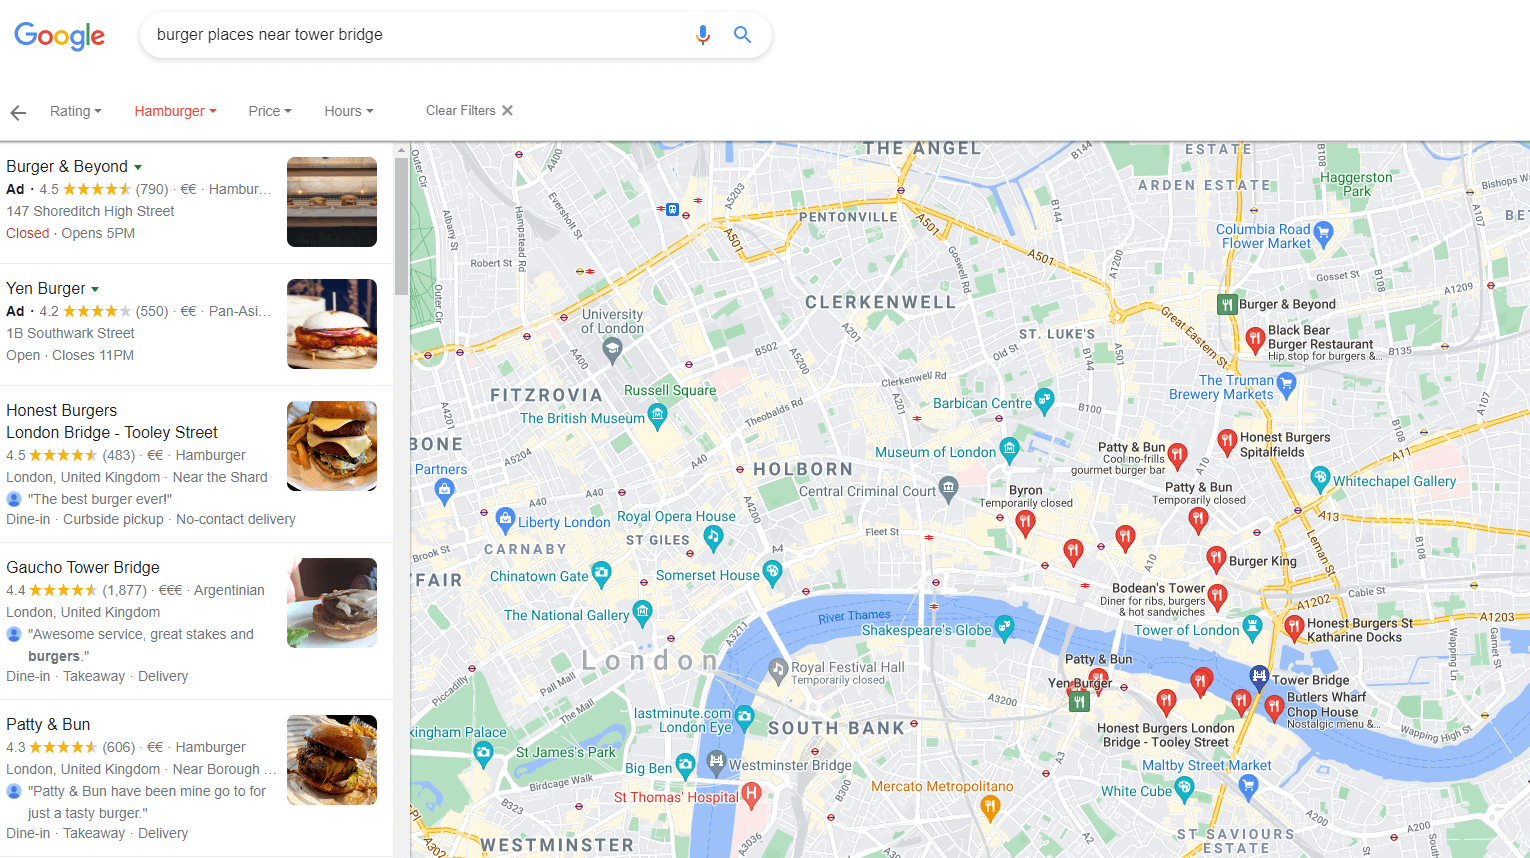 Google Maps results for the search query "burger places near tower bridge"